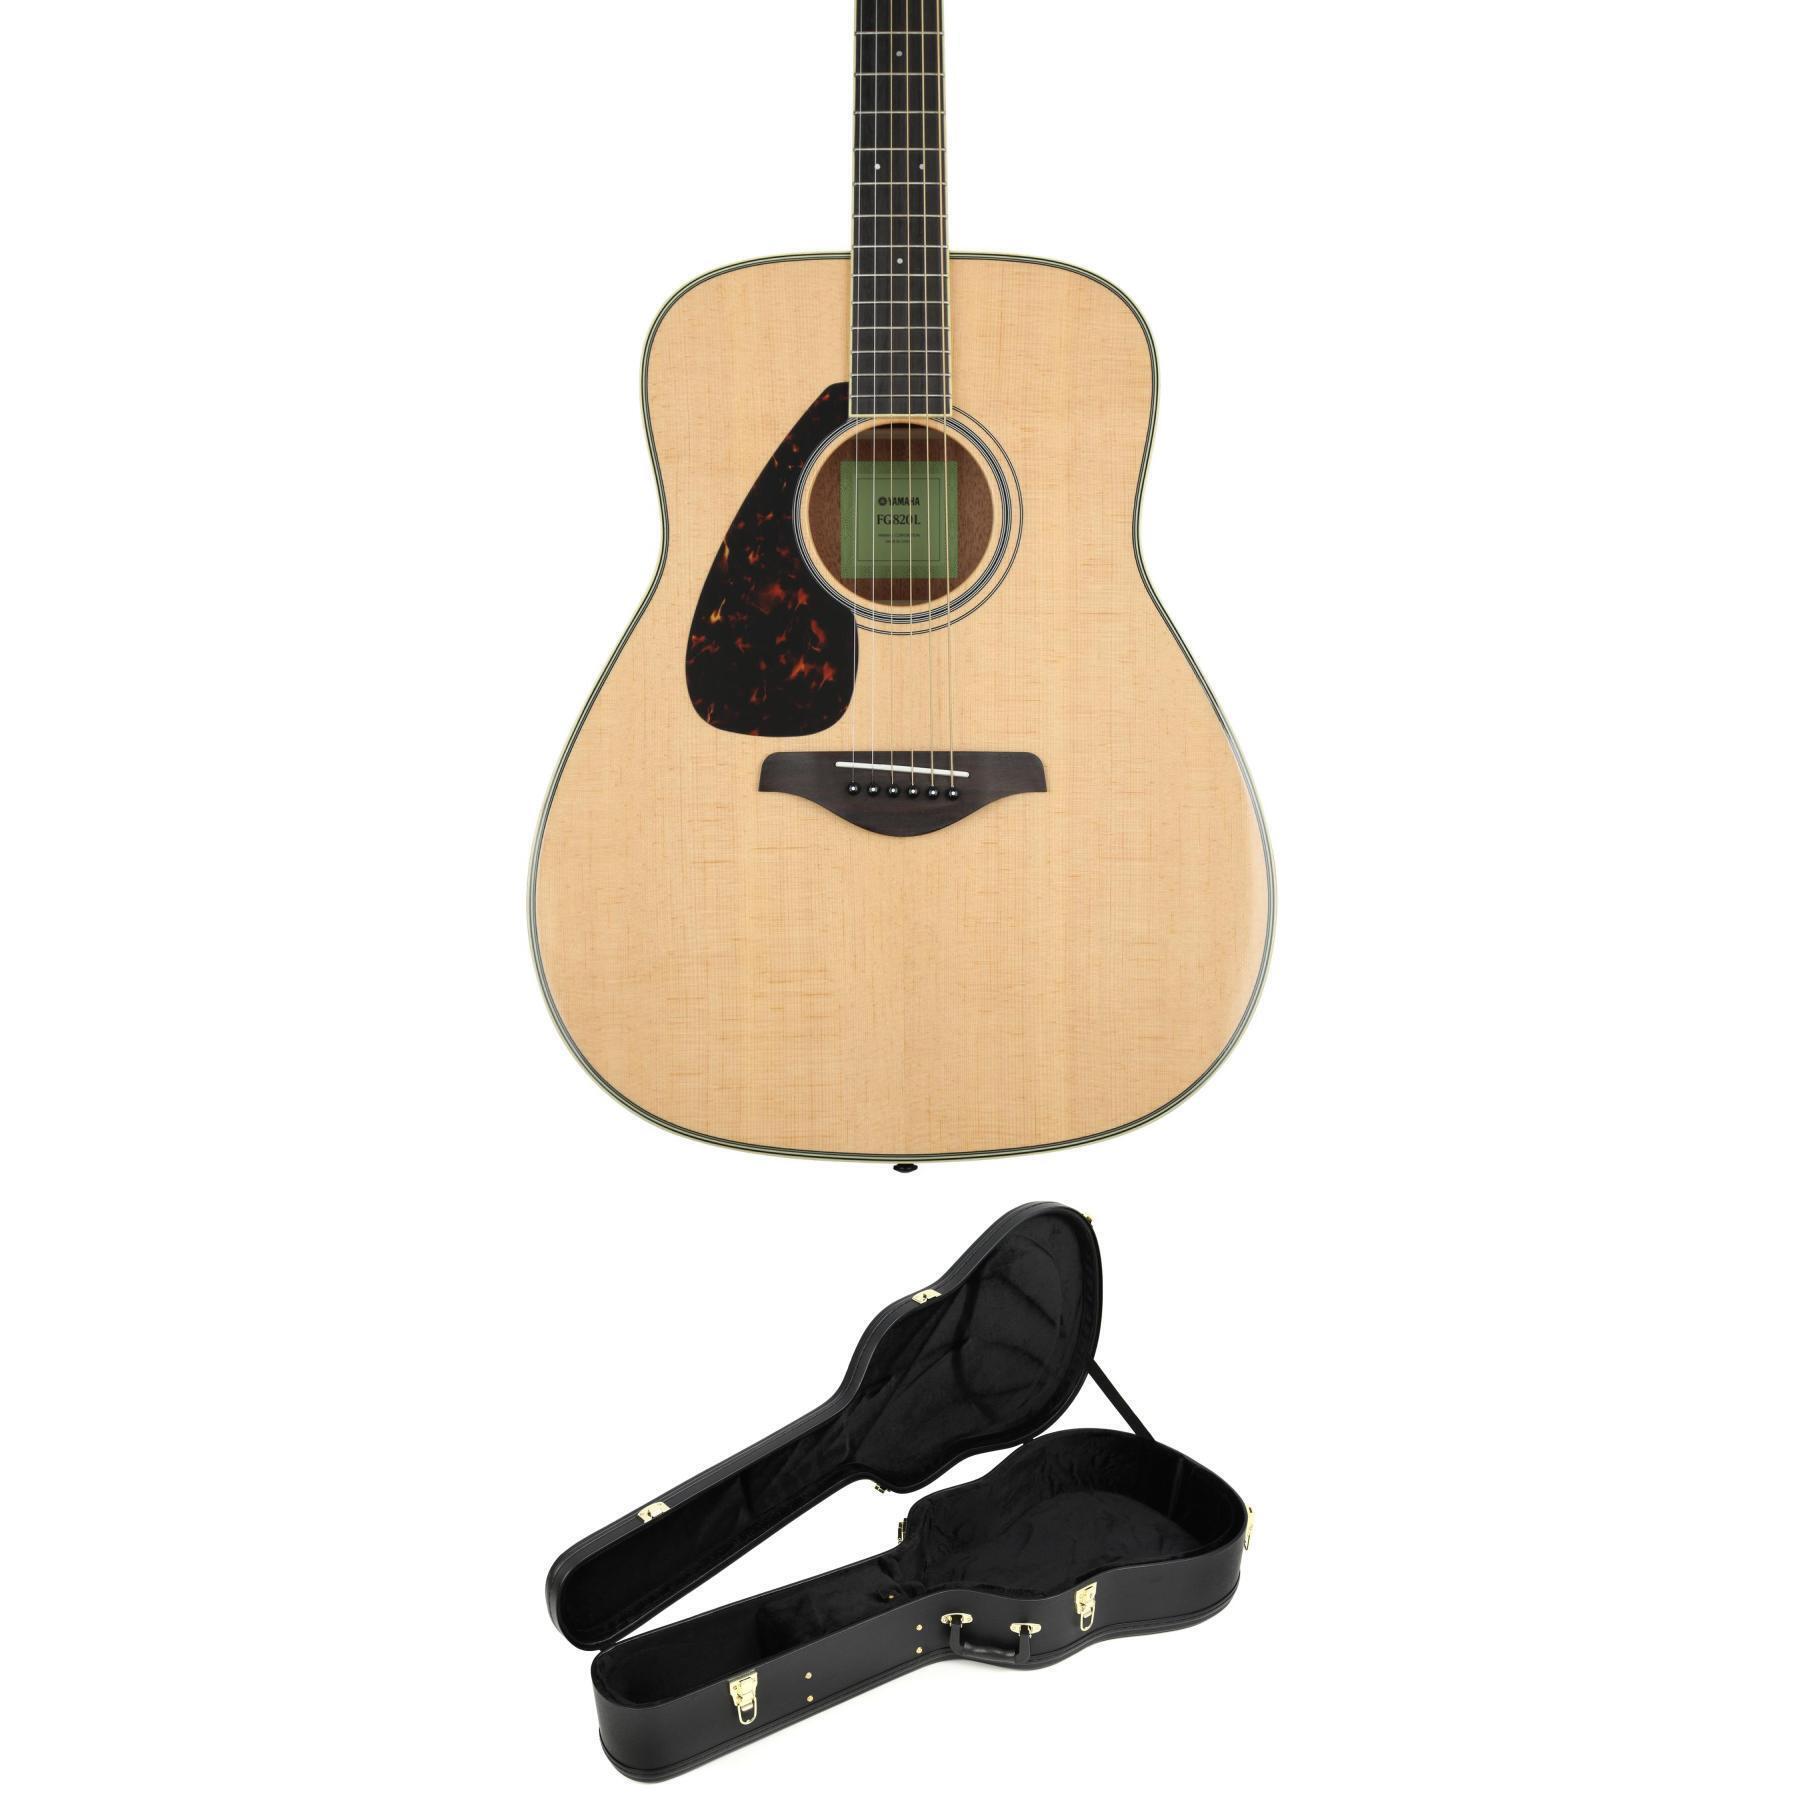 Yamaha FG820 Dreadnought Left-handed Acoustic Guitar with Case- Natural